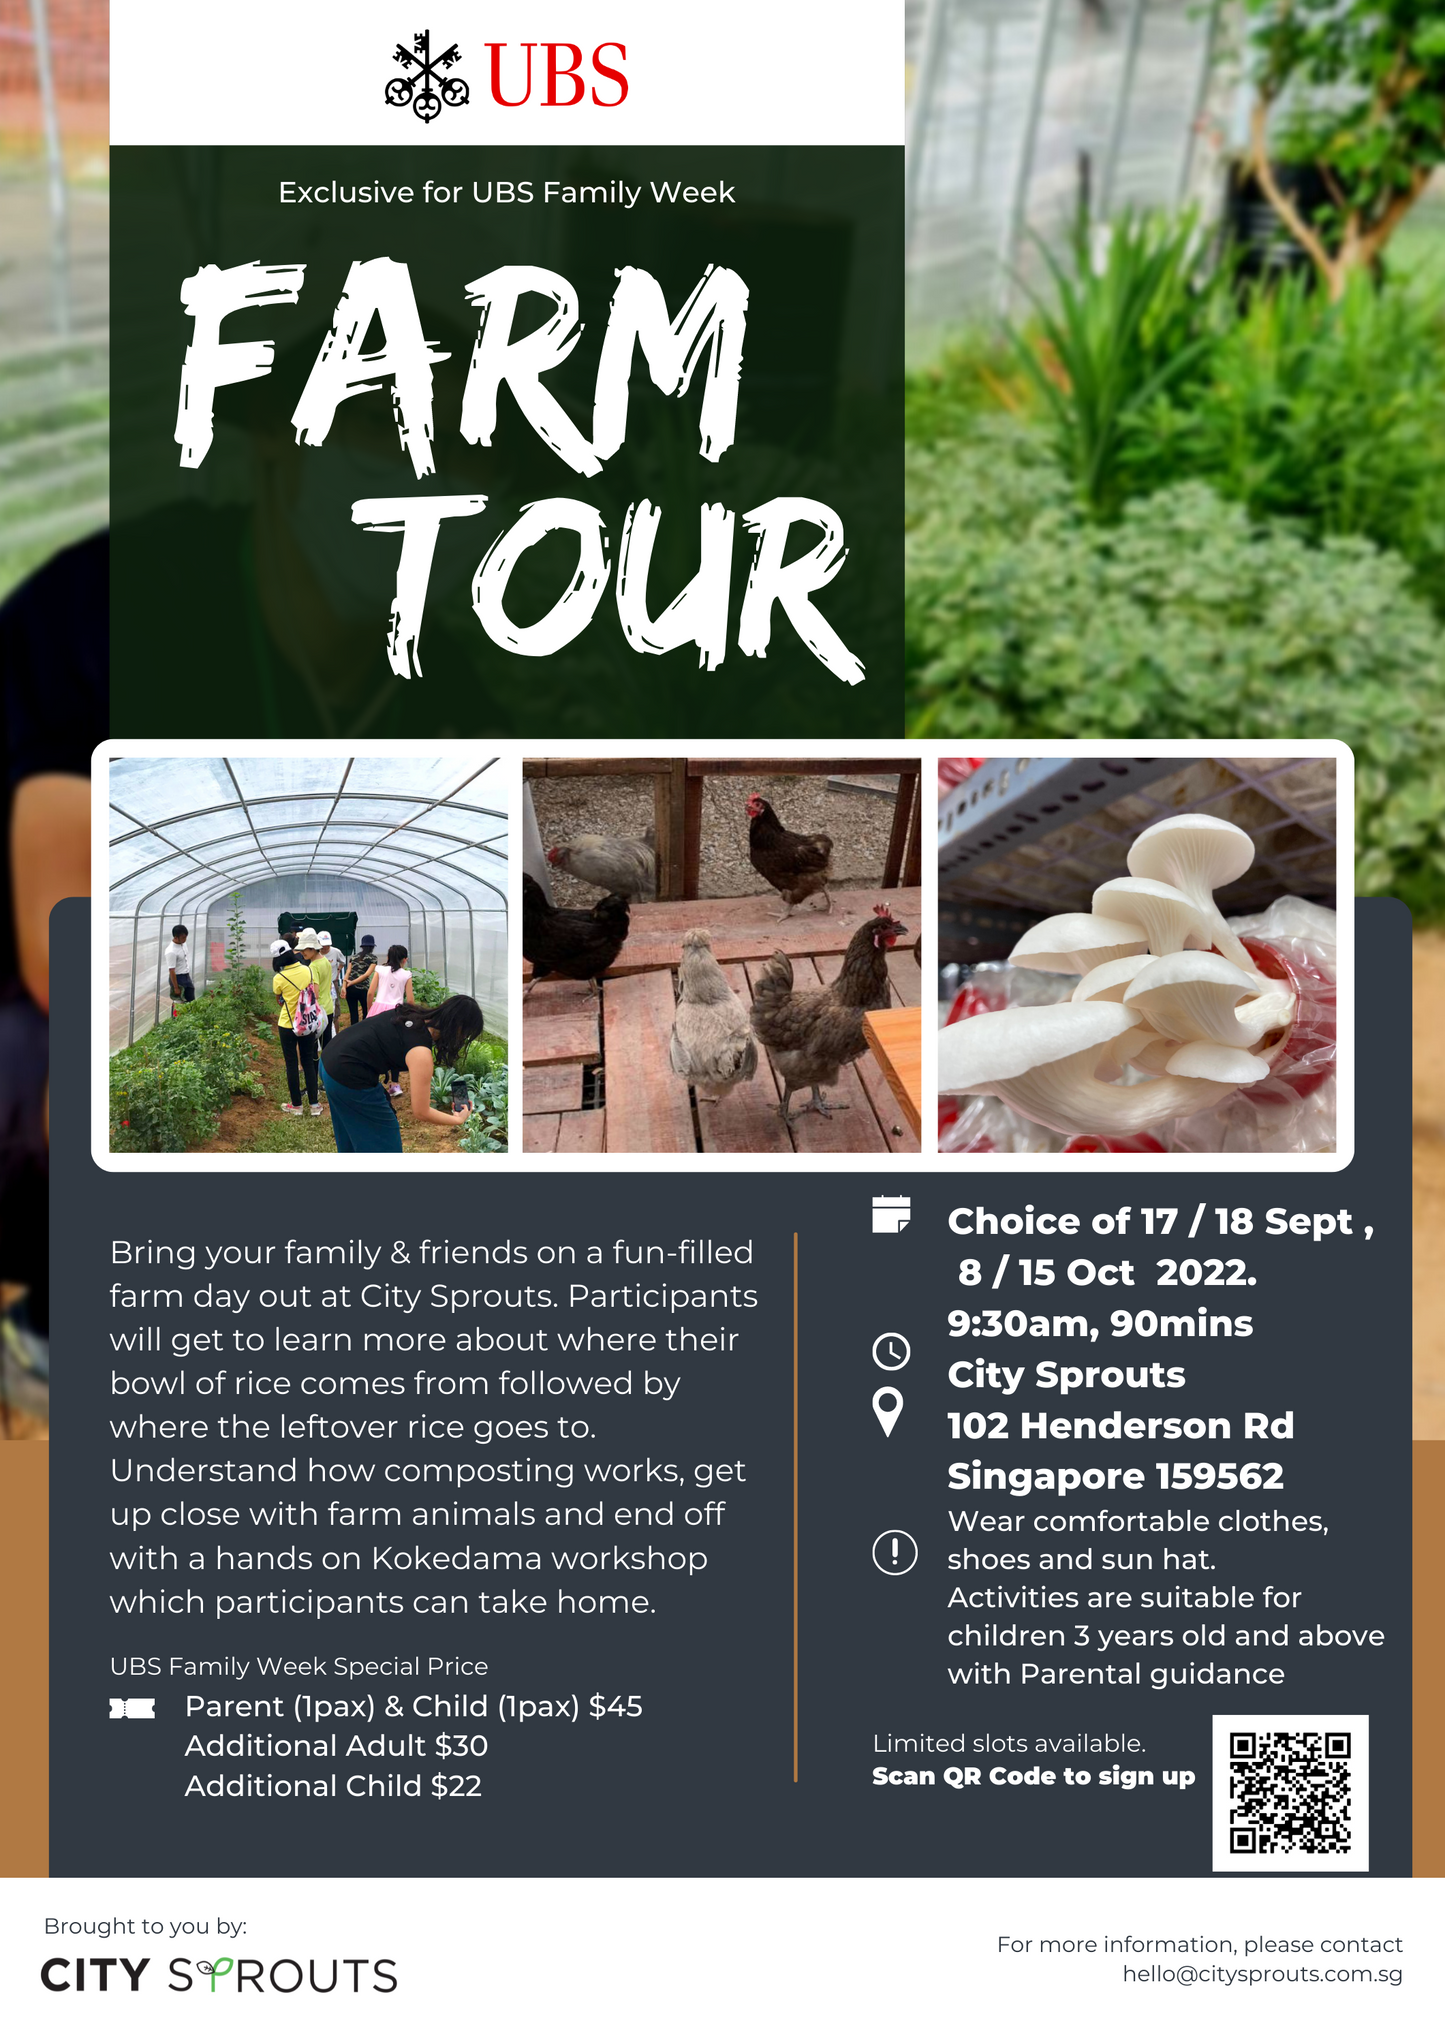 UBS Family Week Exclusive - Farm Tour @ City Sprouts